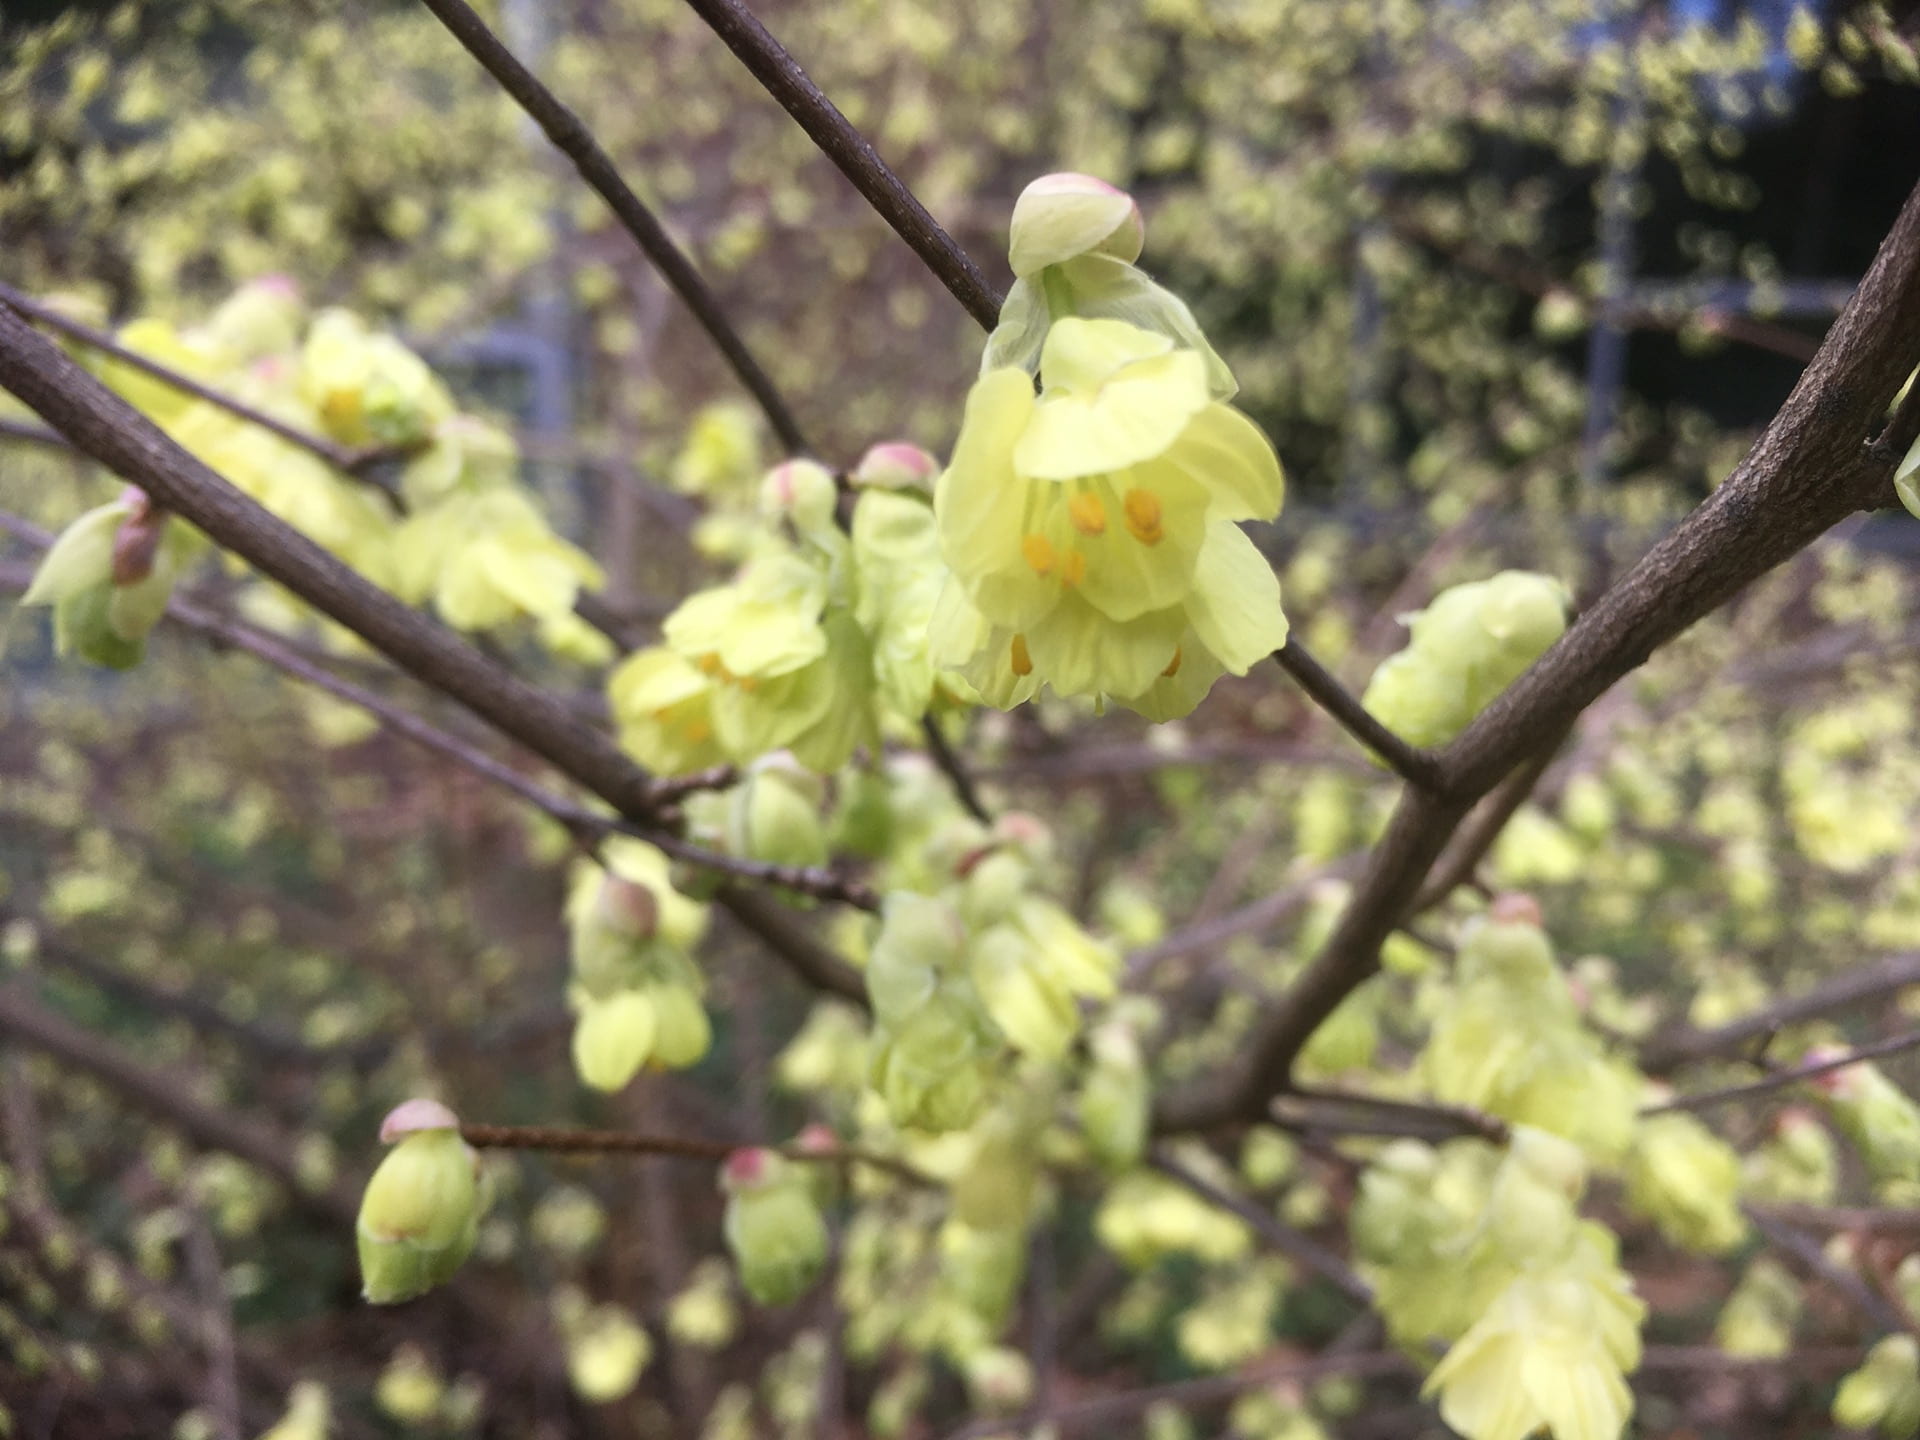 An up close view of the graceful Corylopsis flowers.